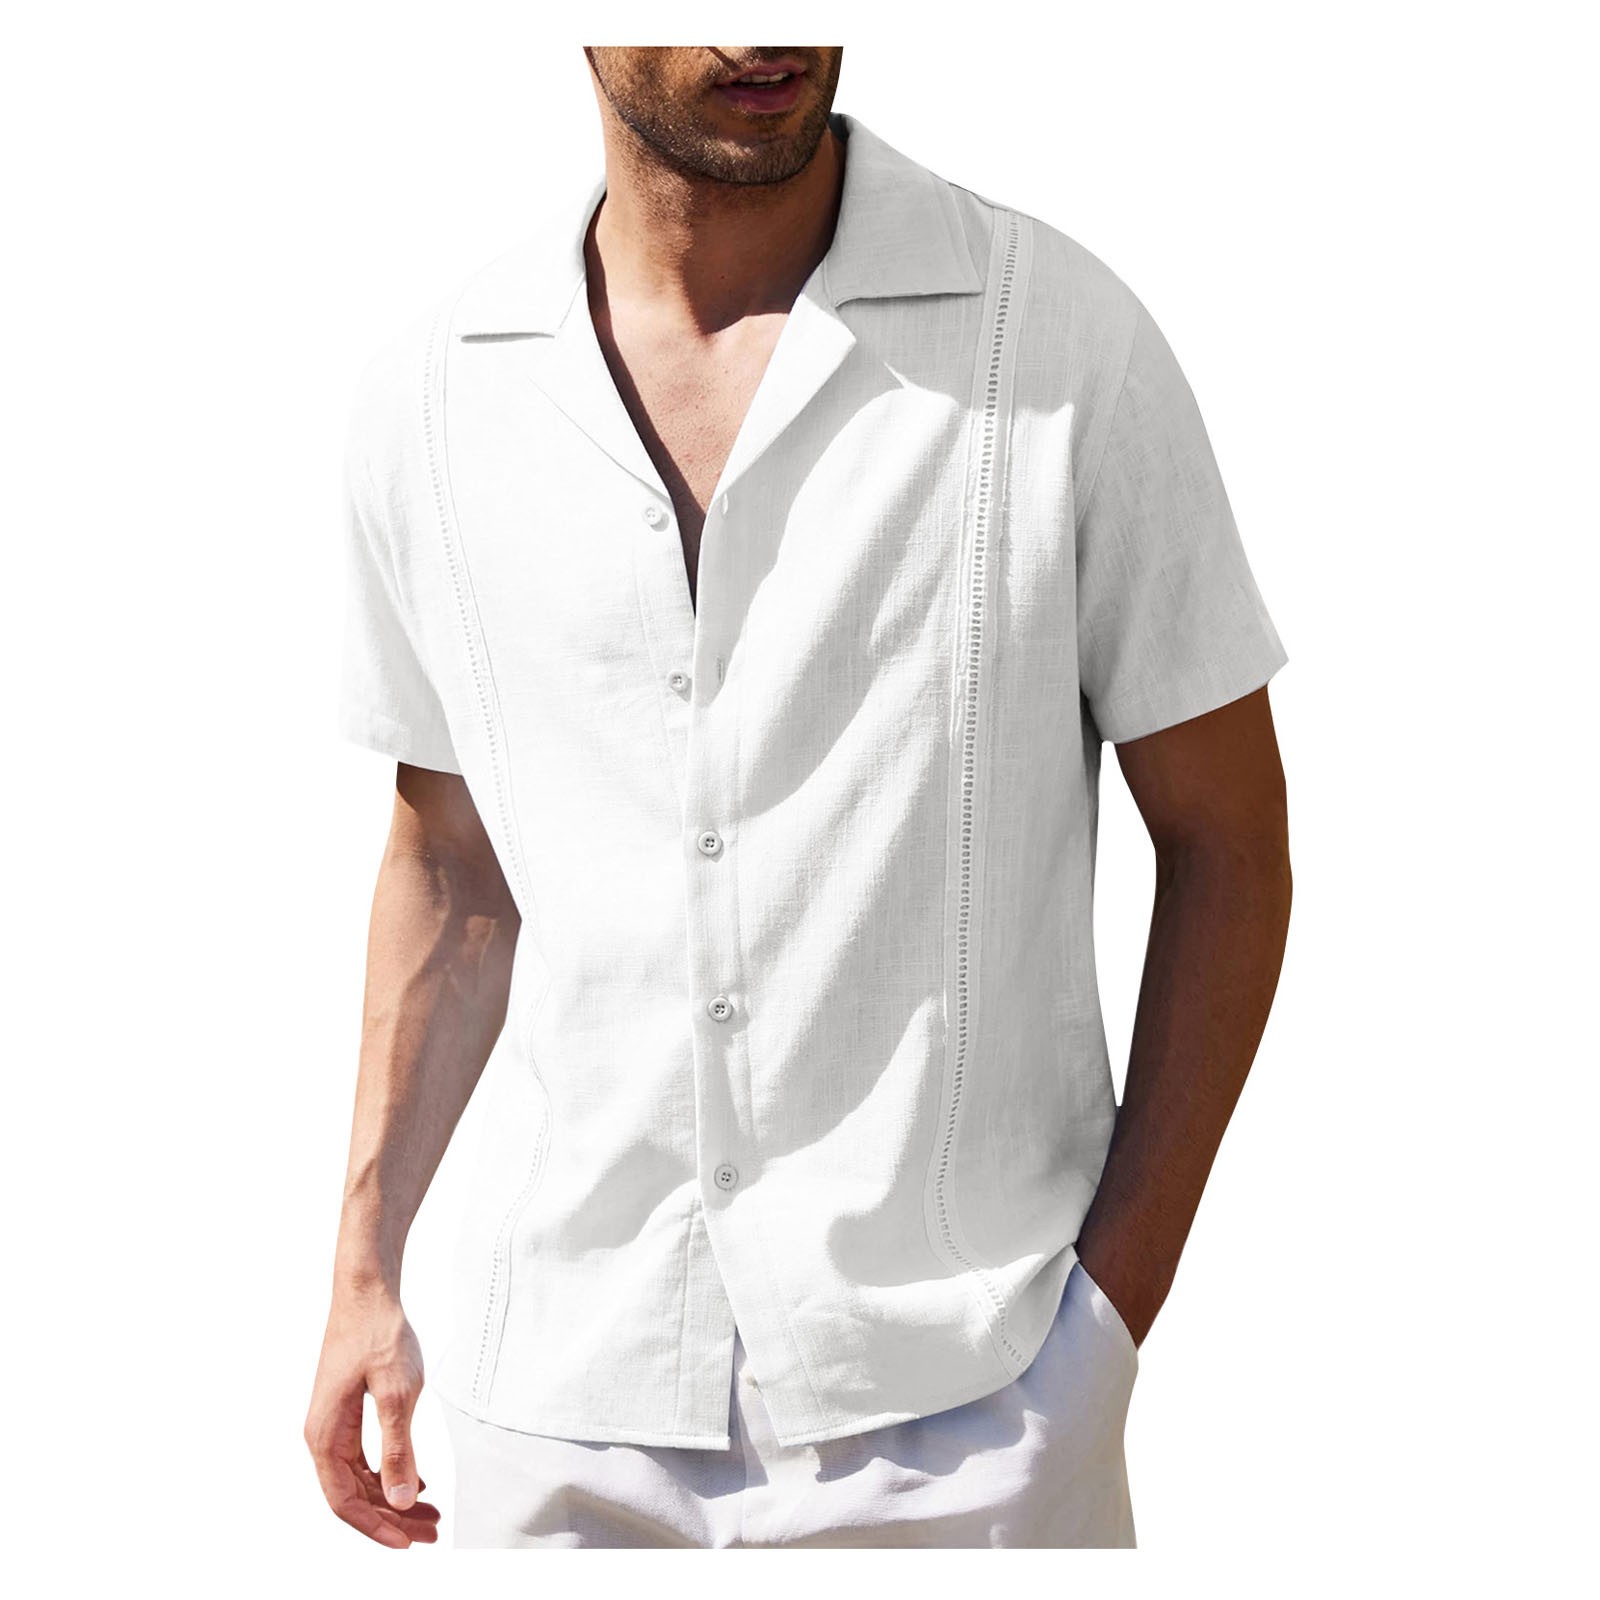 White Hawaiian Shirt For Men Male Summer Casual Embroidery Edge Solid ...